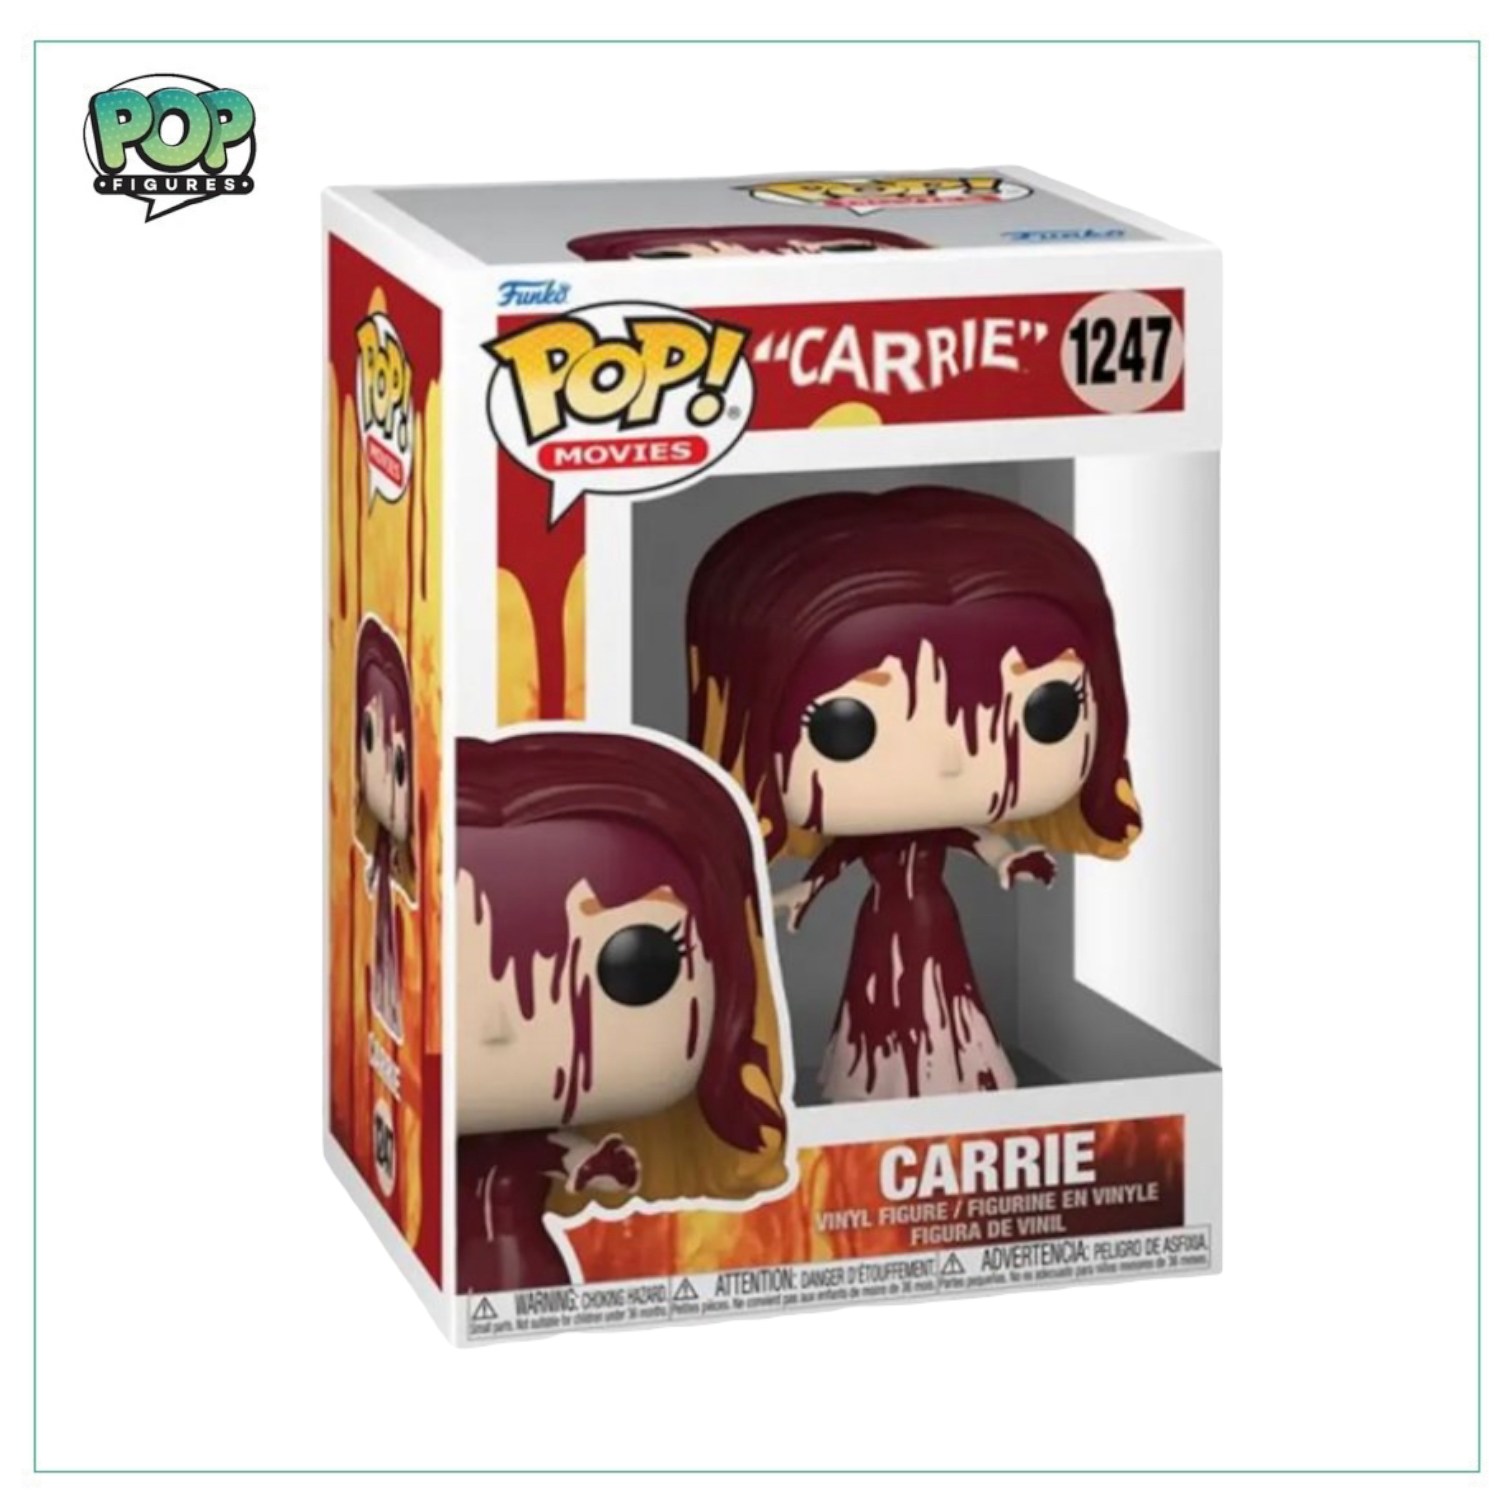 Carrie #1247 Funko Pop! Carrie - PREORDER